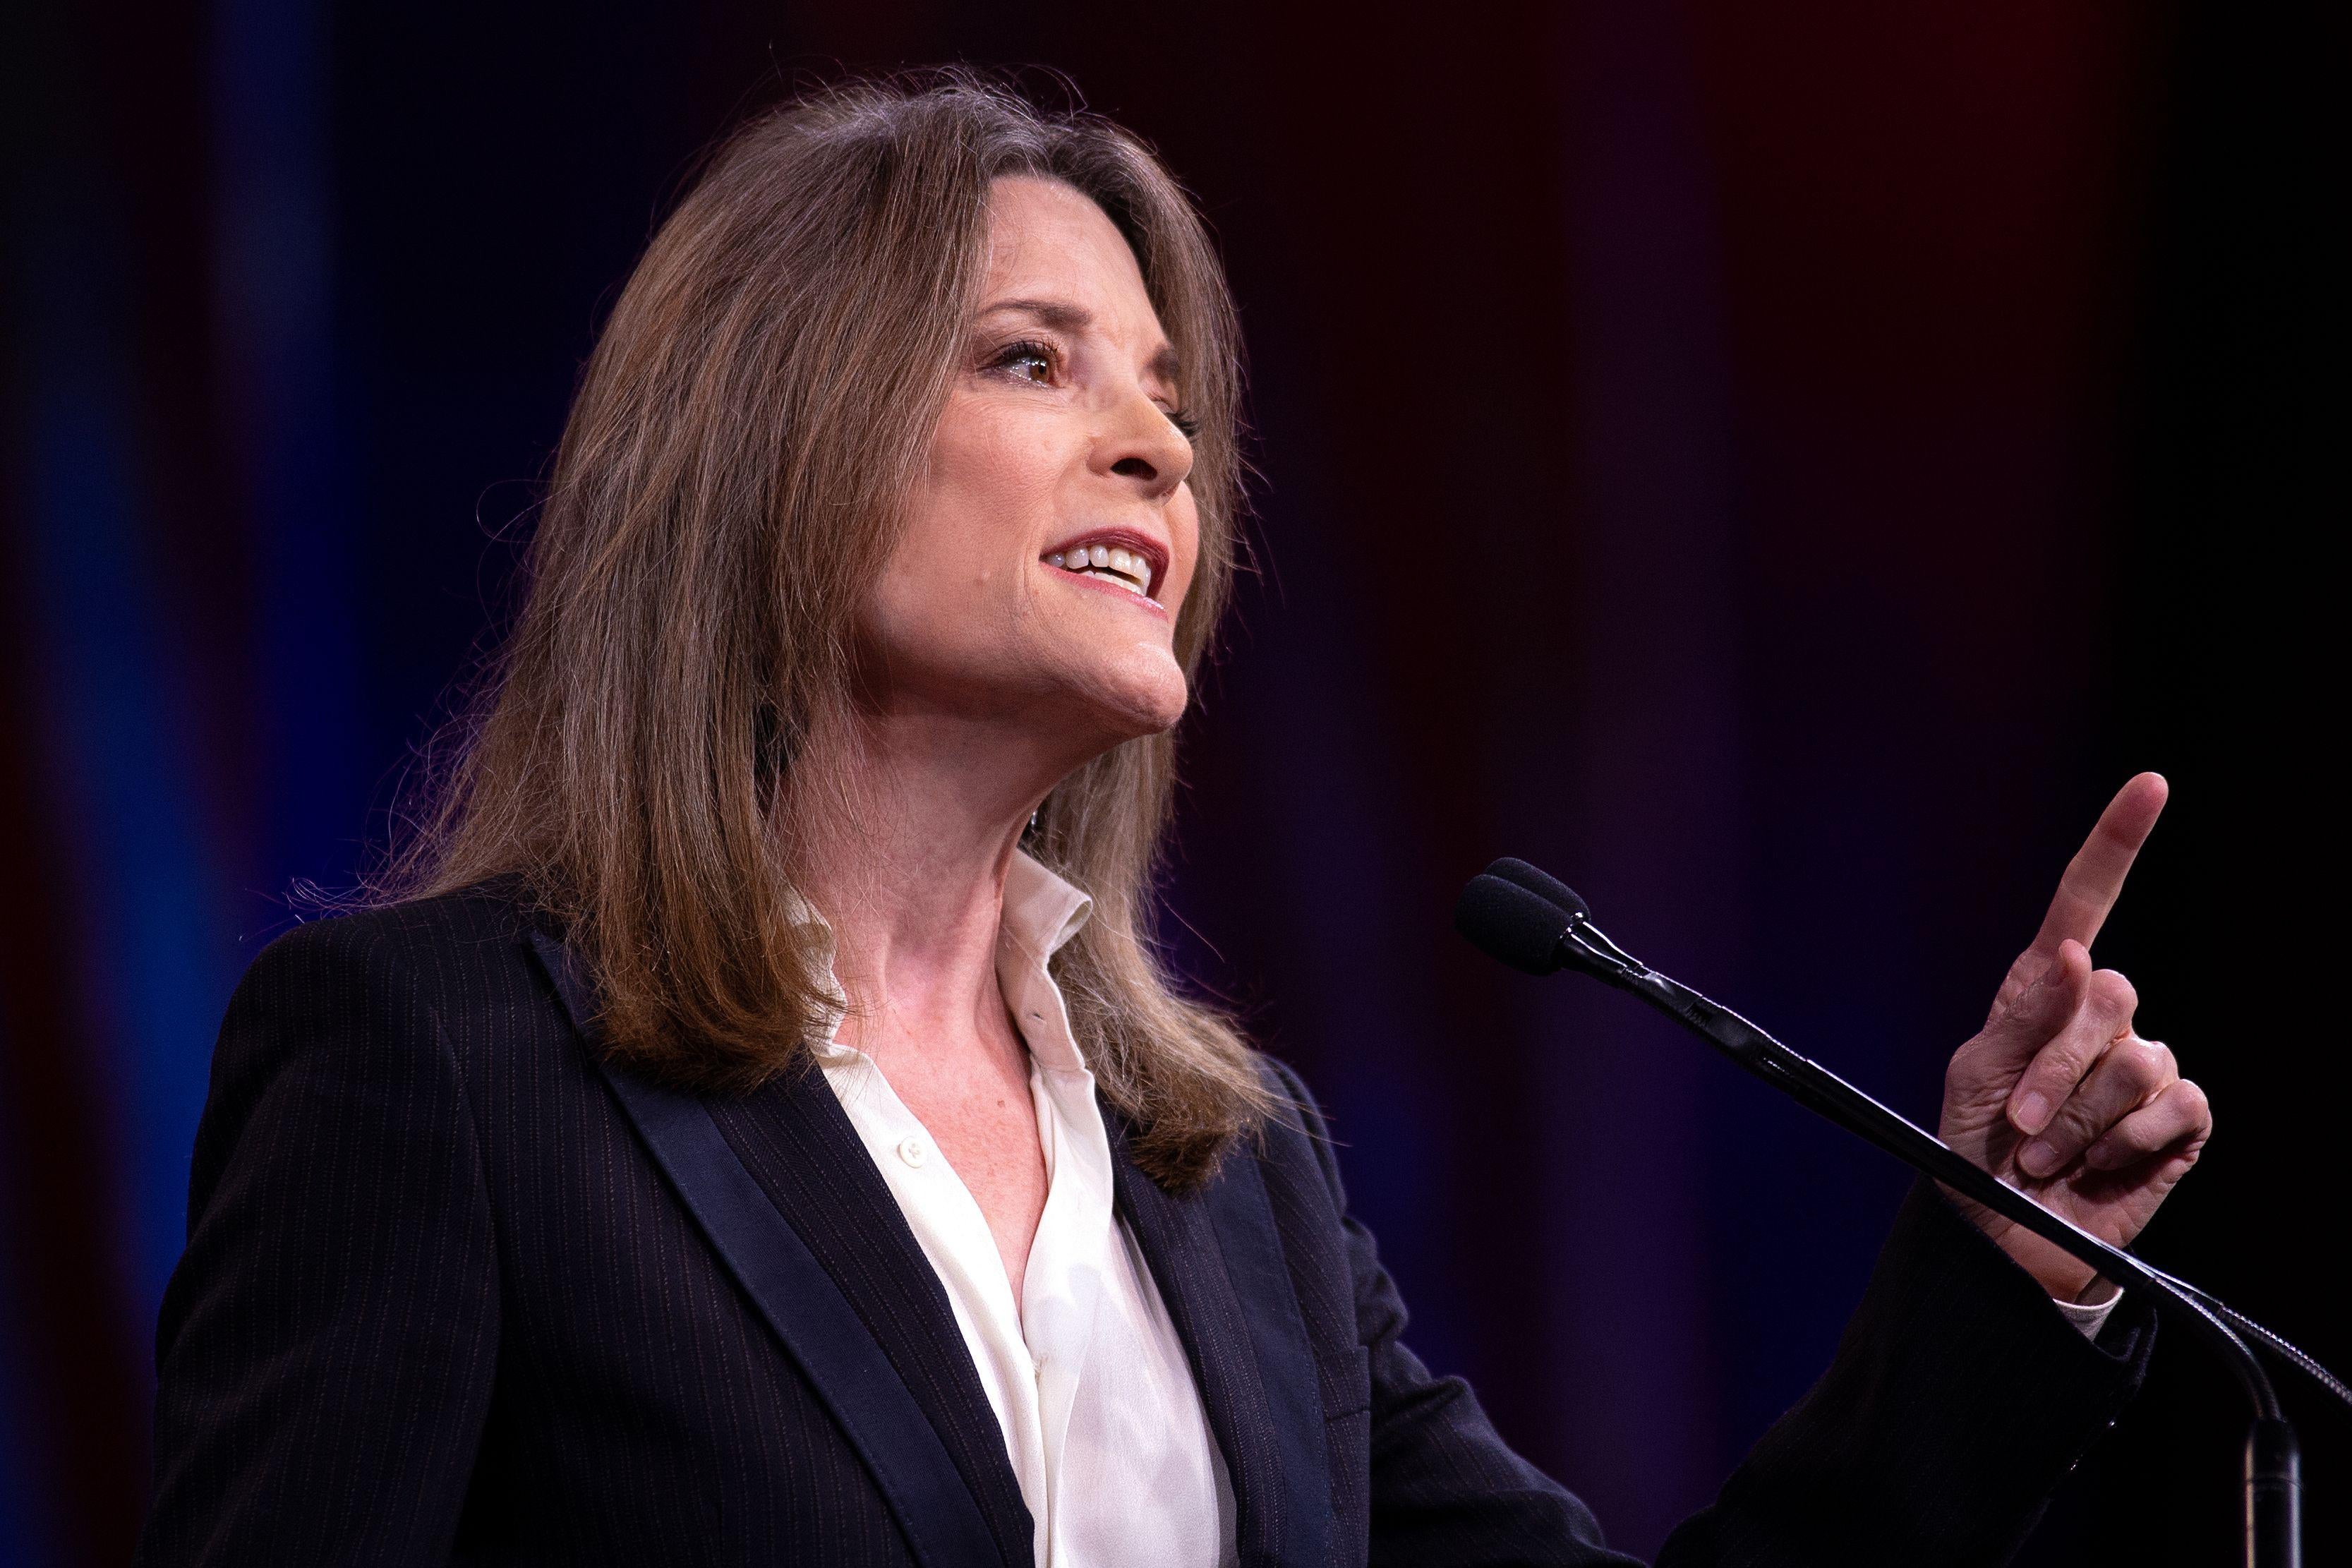 Marianne Williamson points a finger while speaking at a podium.